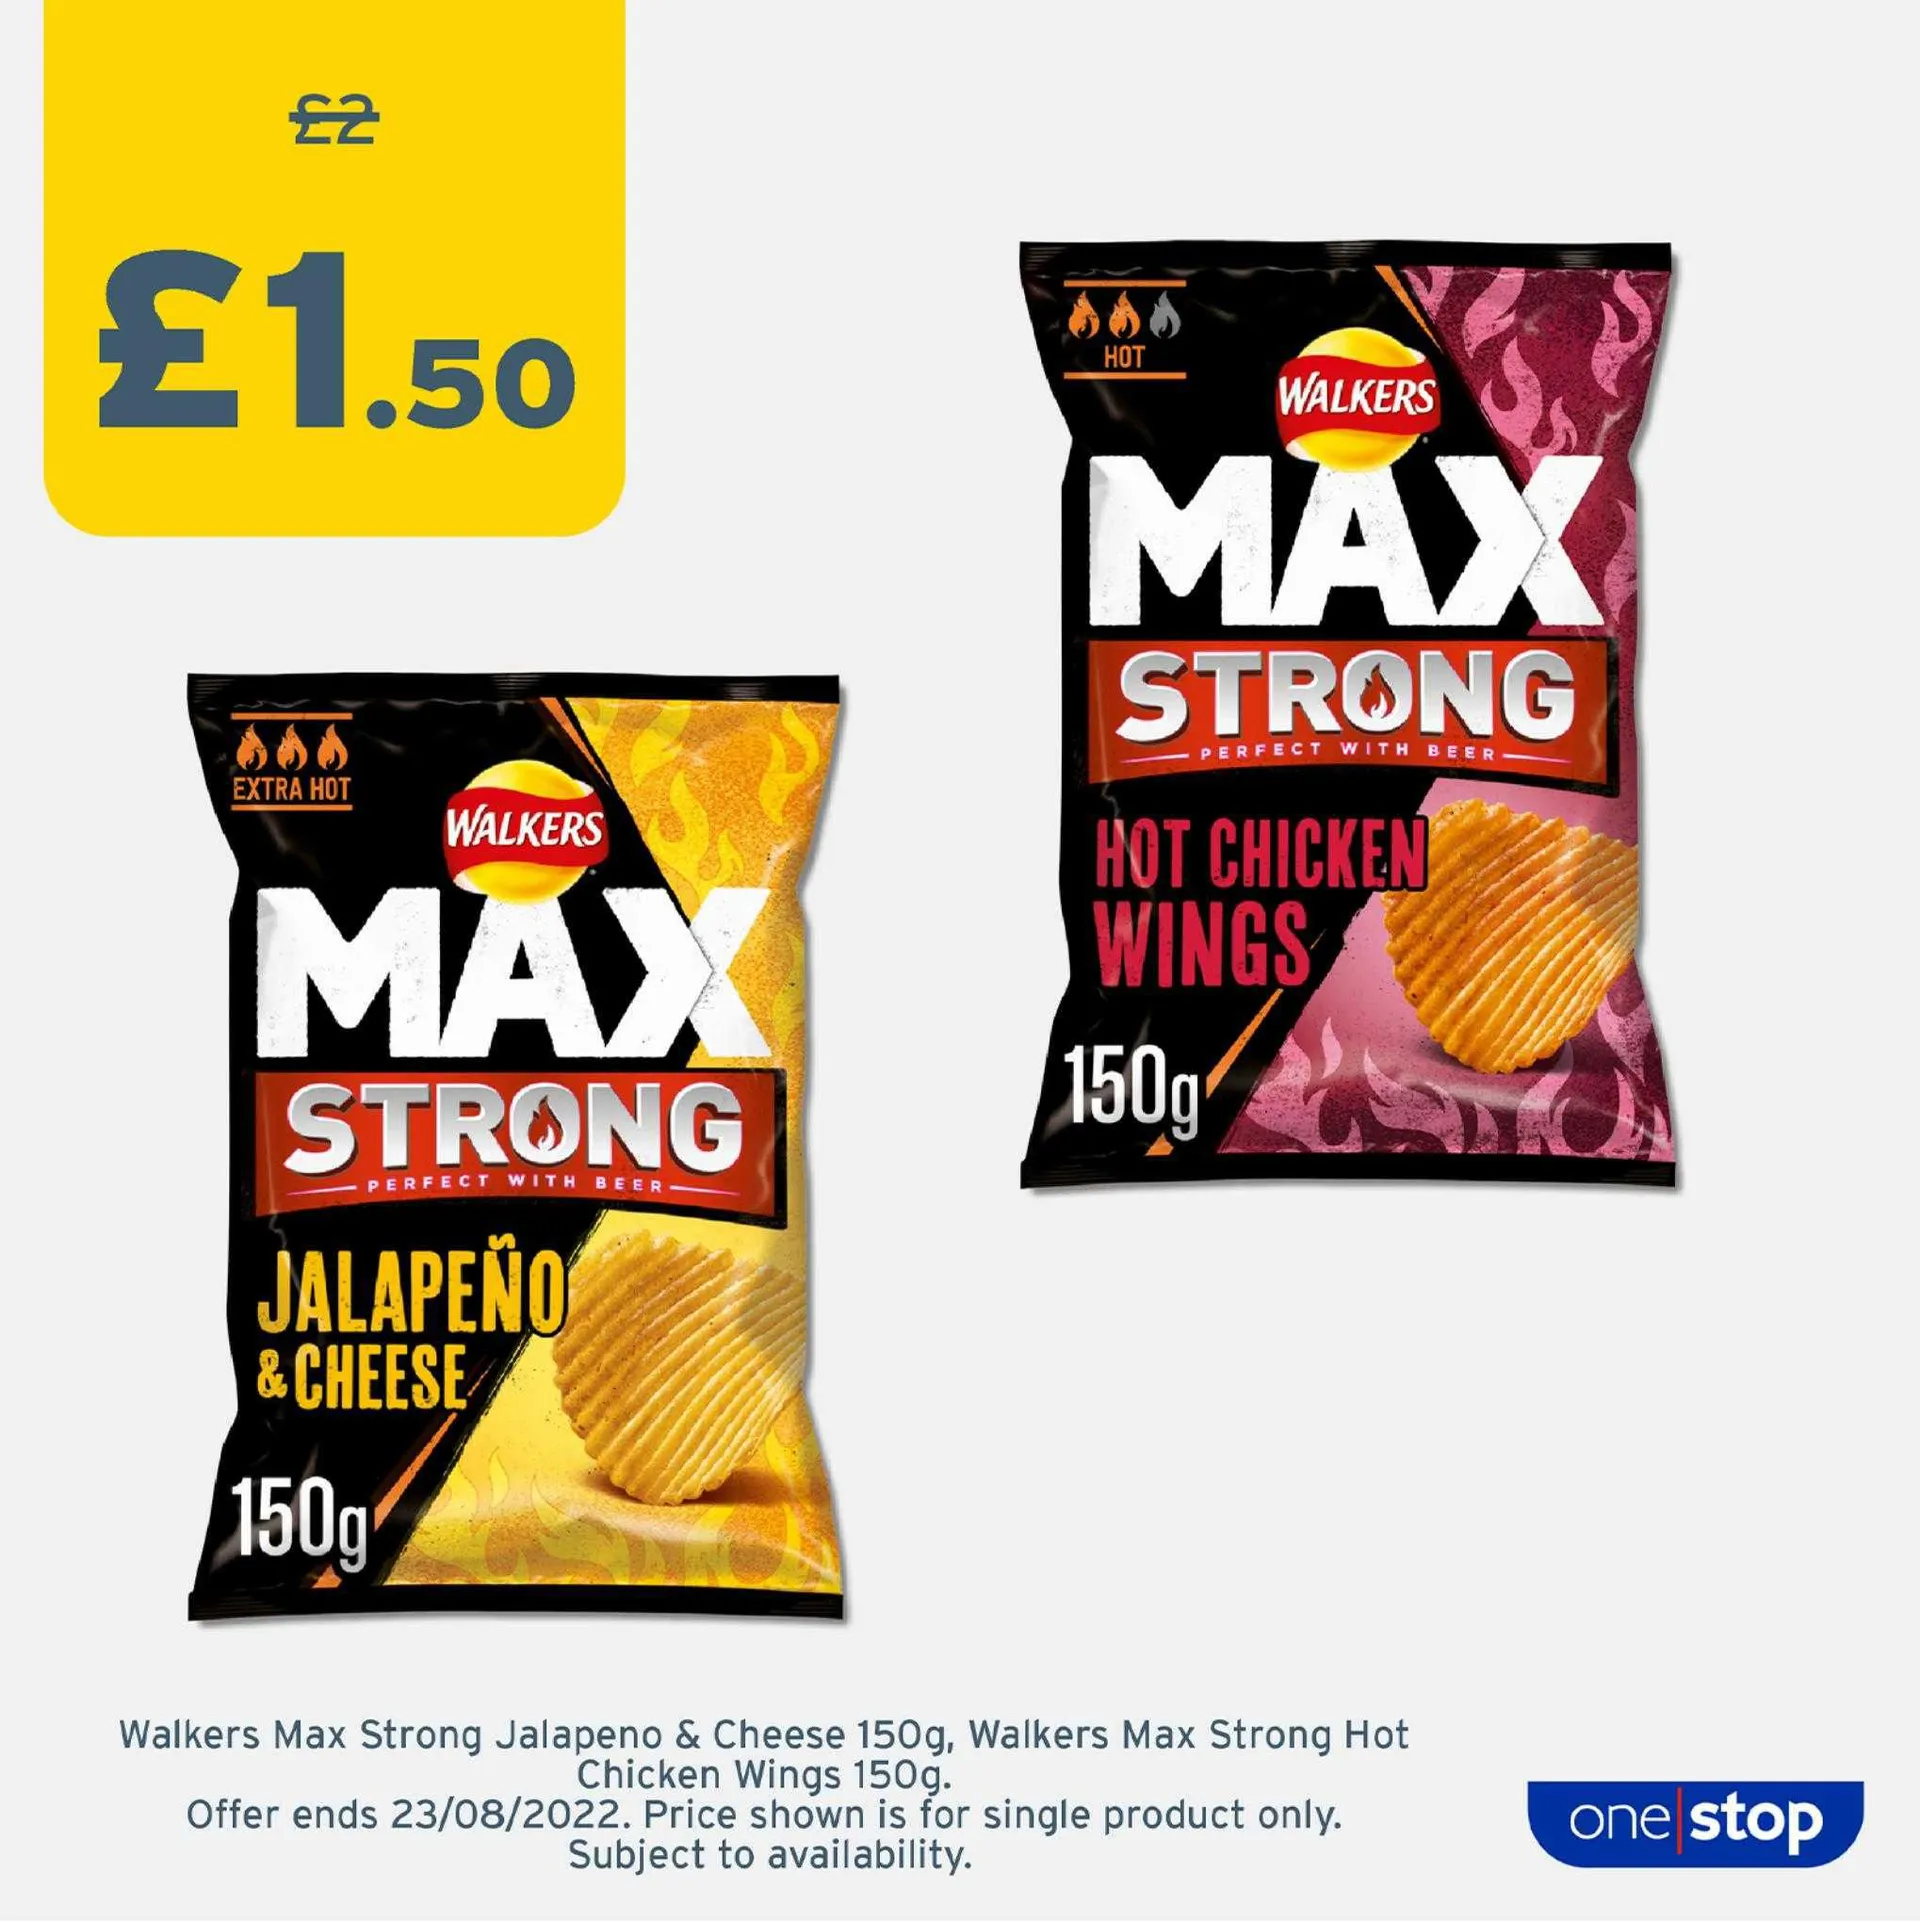 One Stop Weekly Offers - 1